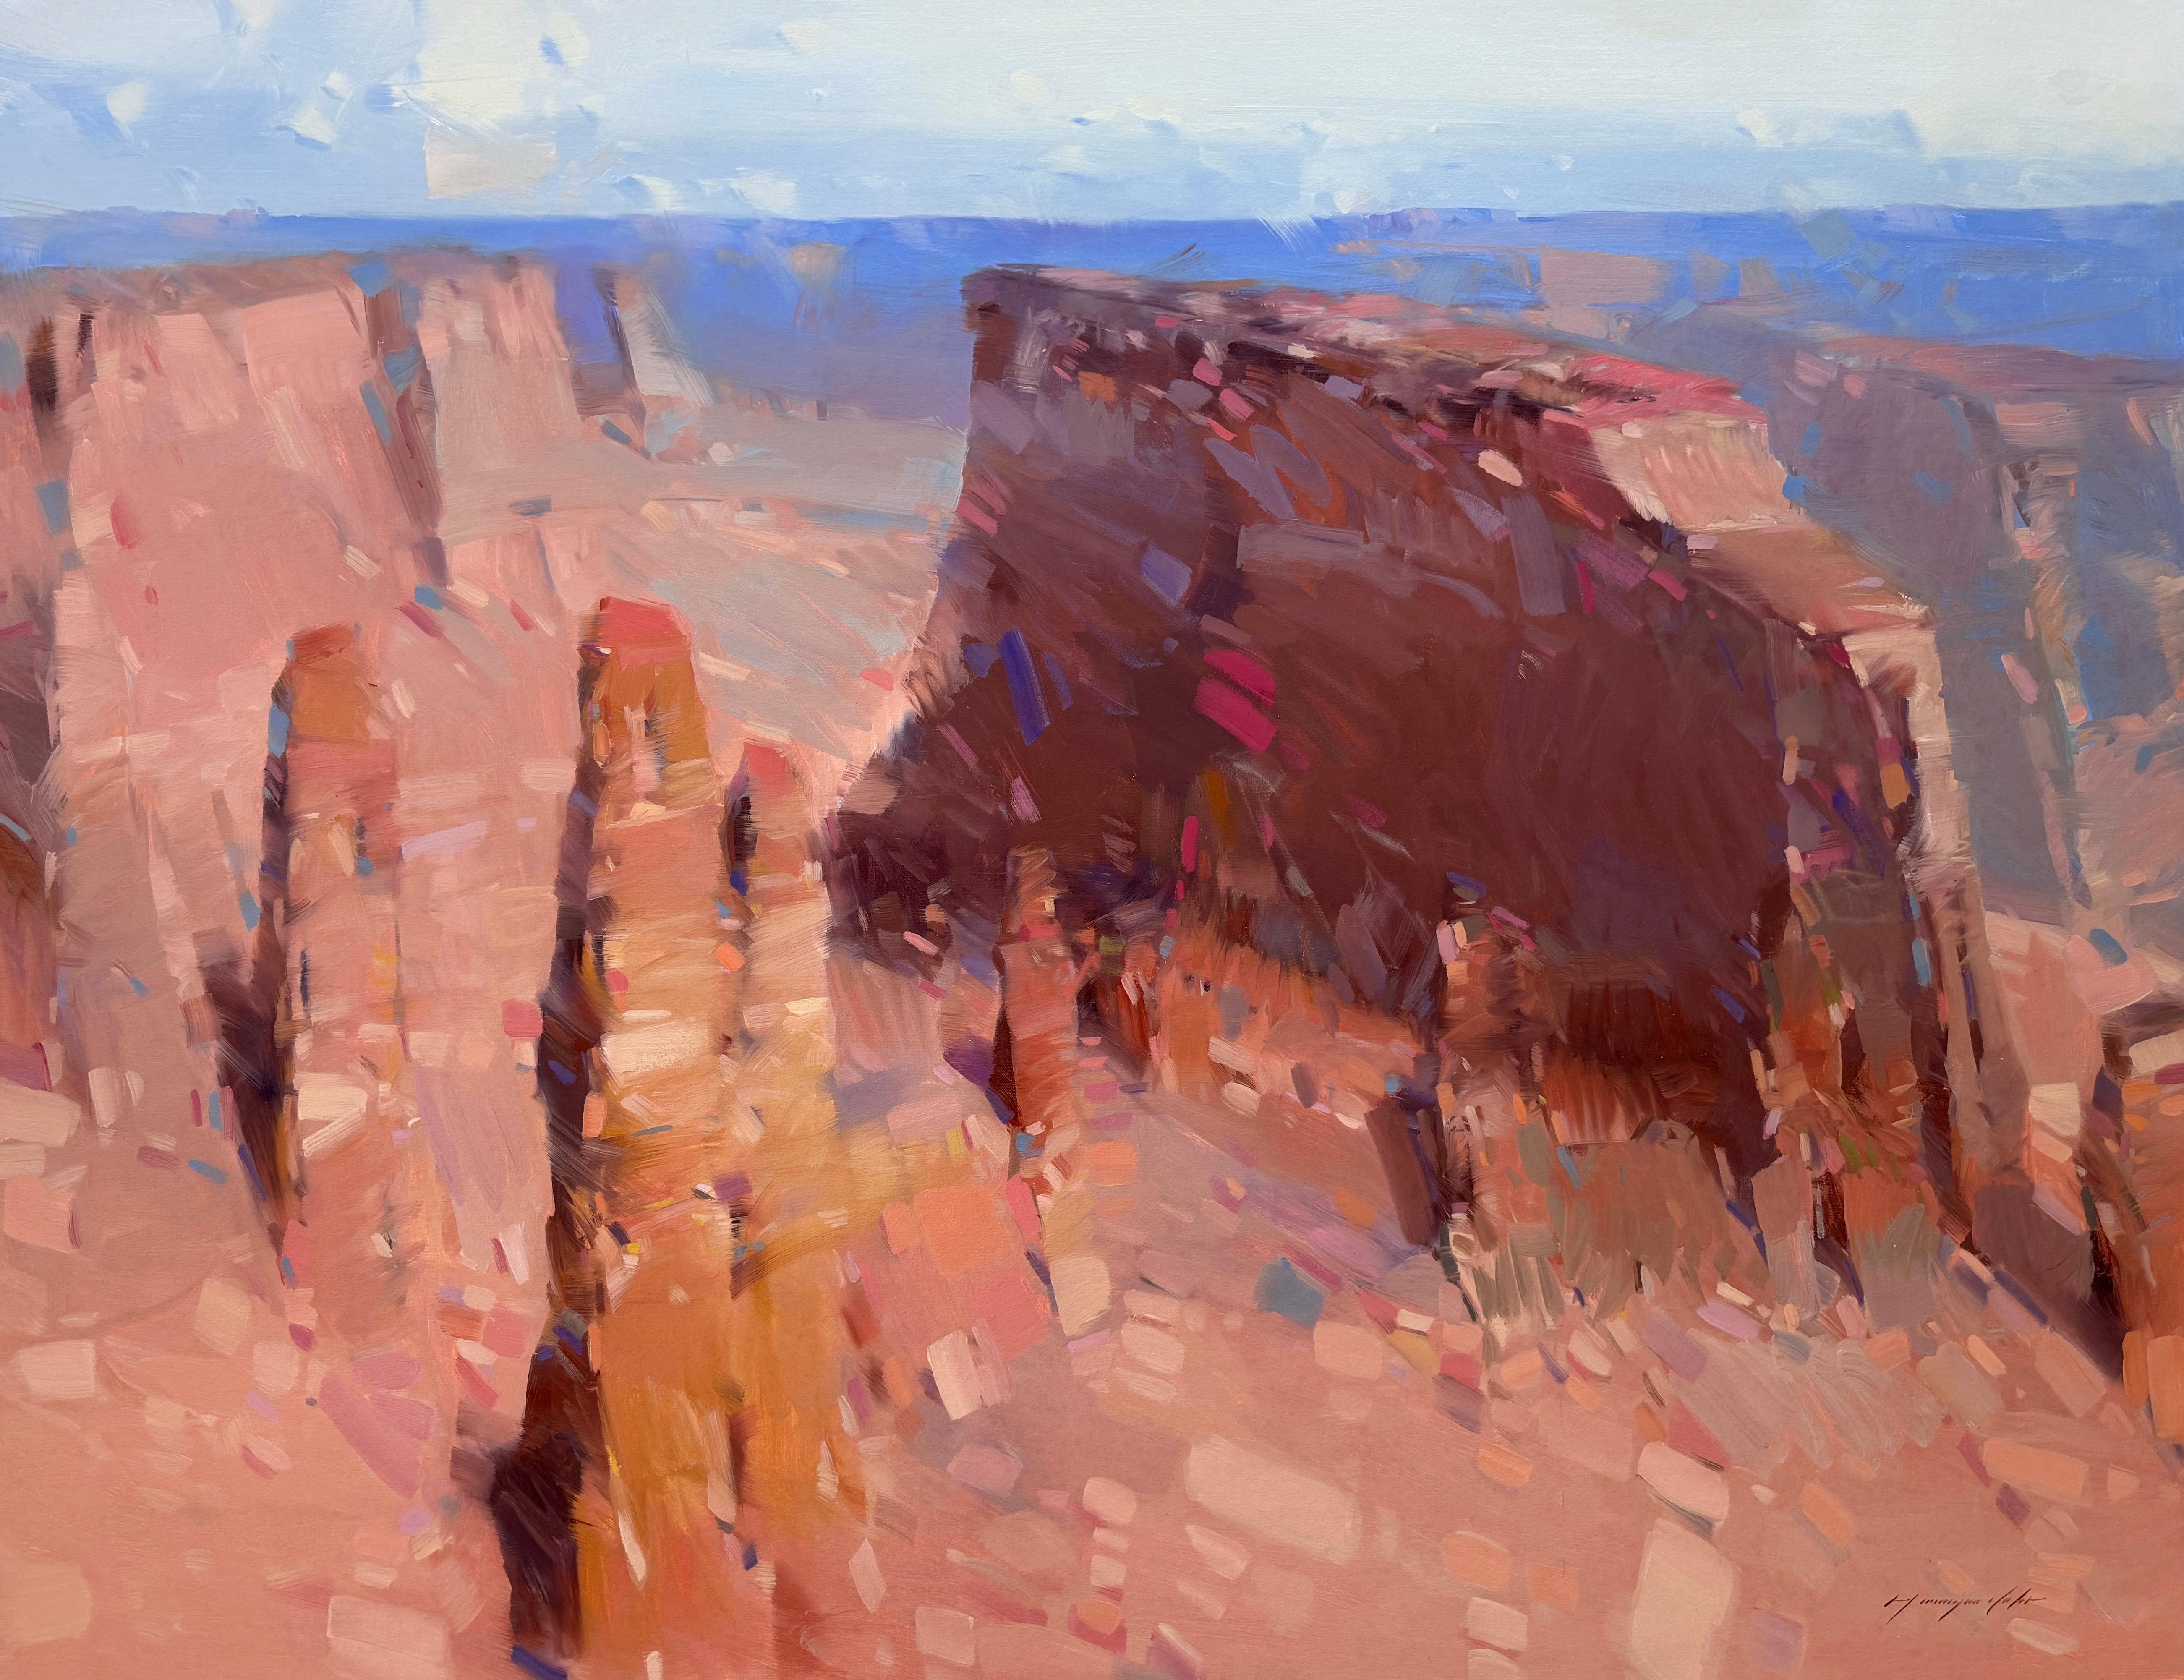 Vahe Yeremyan Landscape Painting - Canyon View, Landscape, Original oil Painting, Ready to Hang, Impressionism